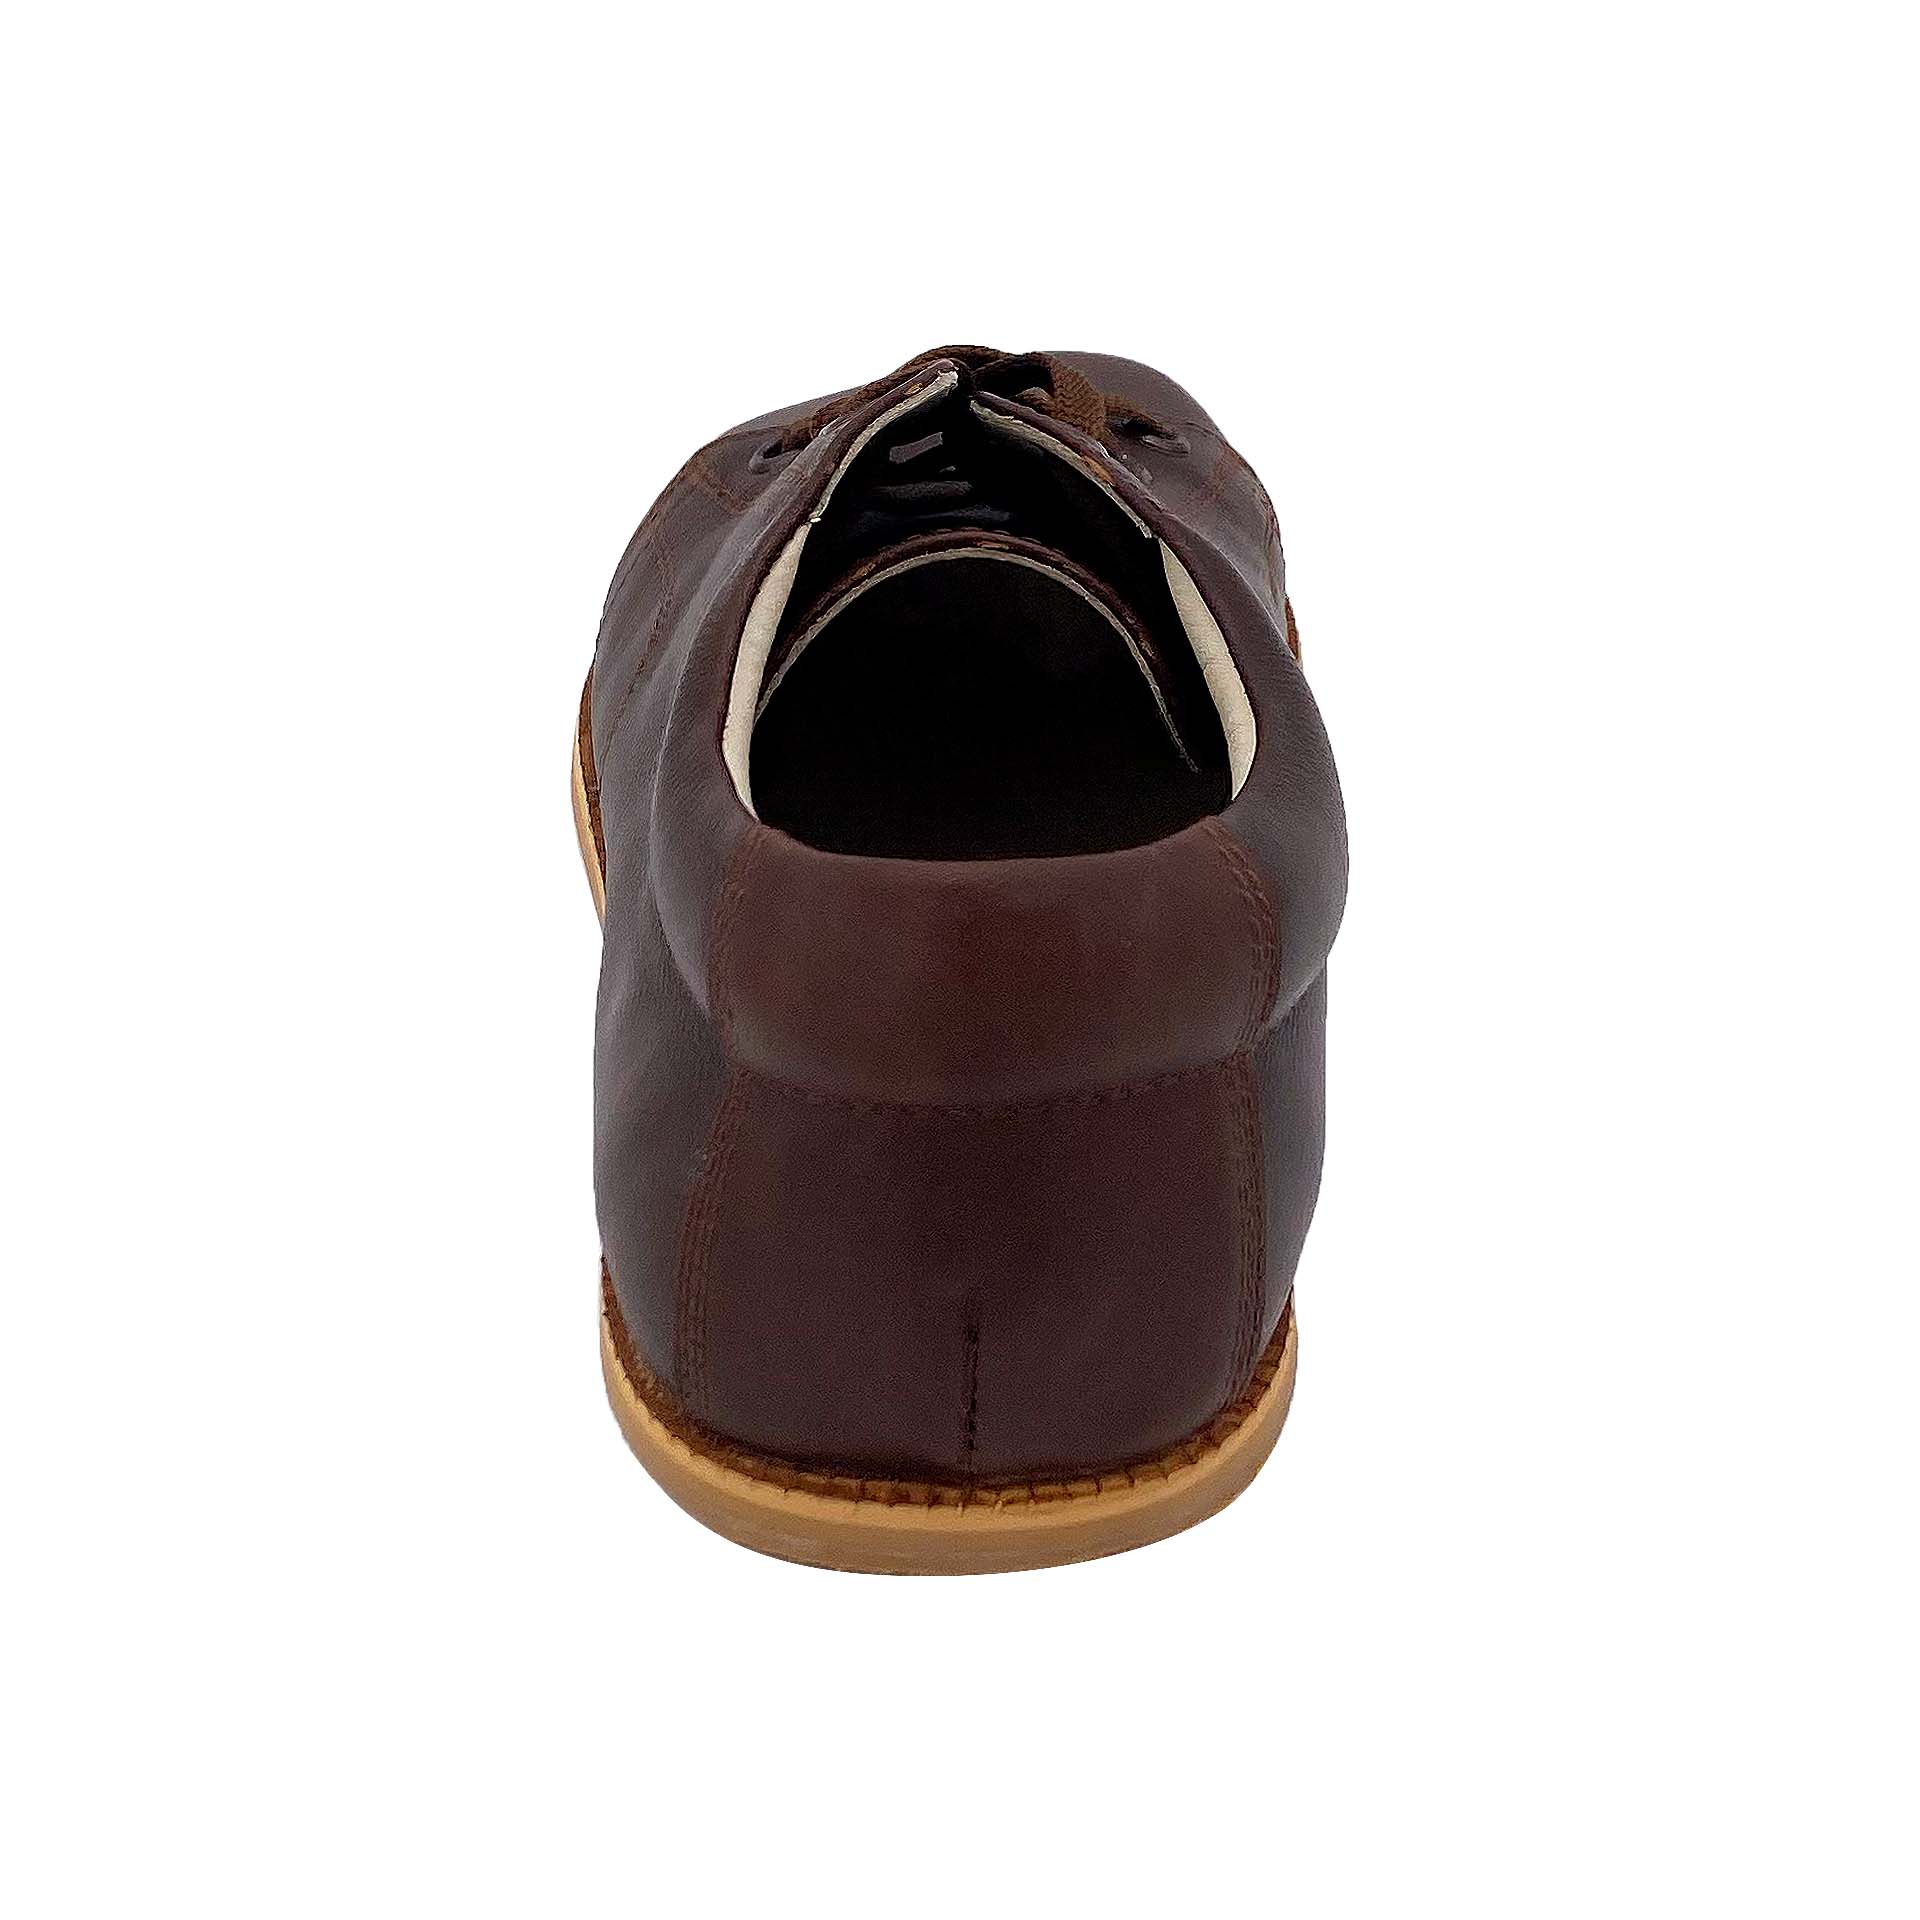 Women's FINAL CLEARANCE Earthing Shoes Wide with Copper Rivet Walkers